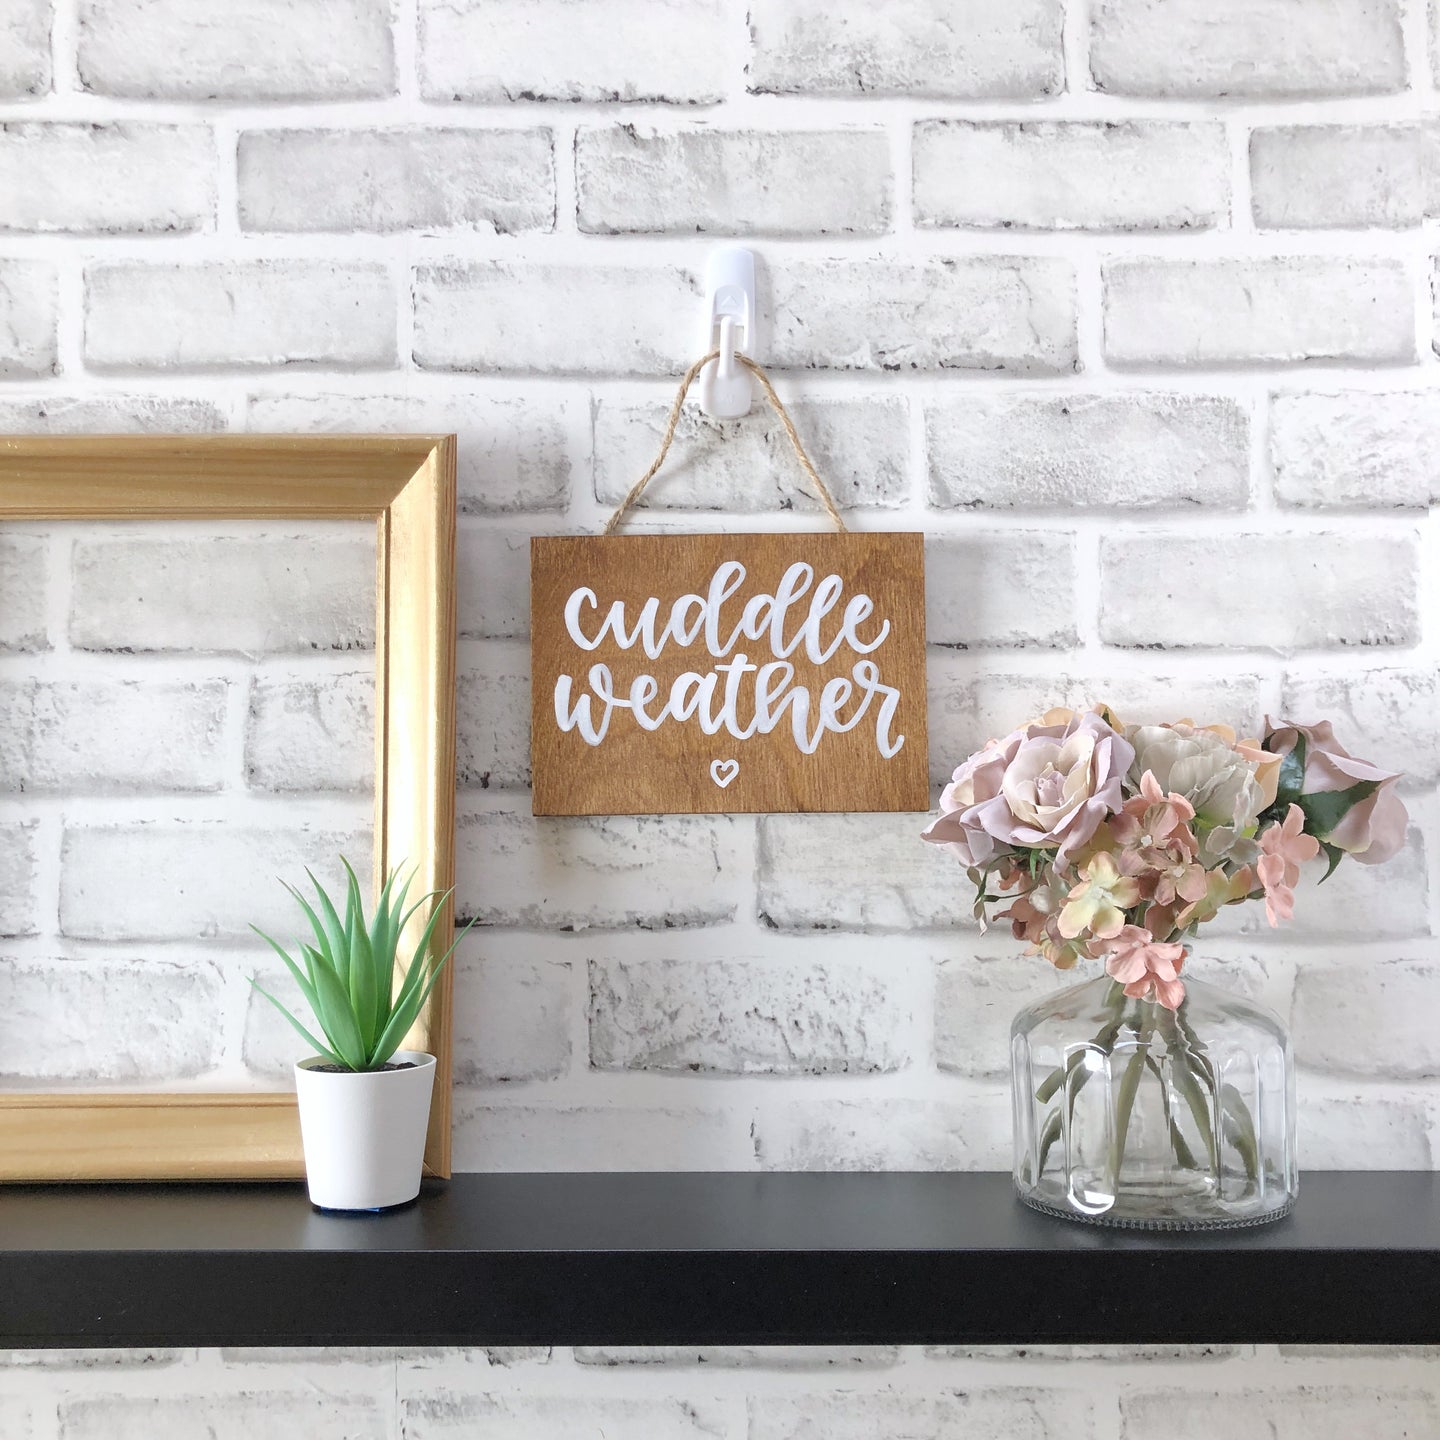 Cuddle Weather Wood Sign